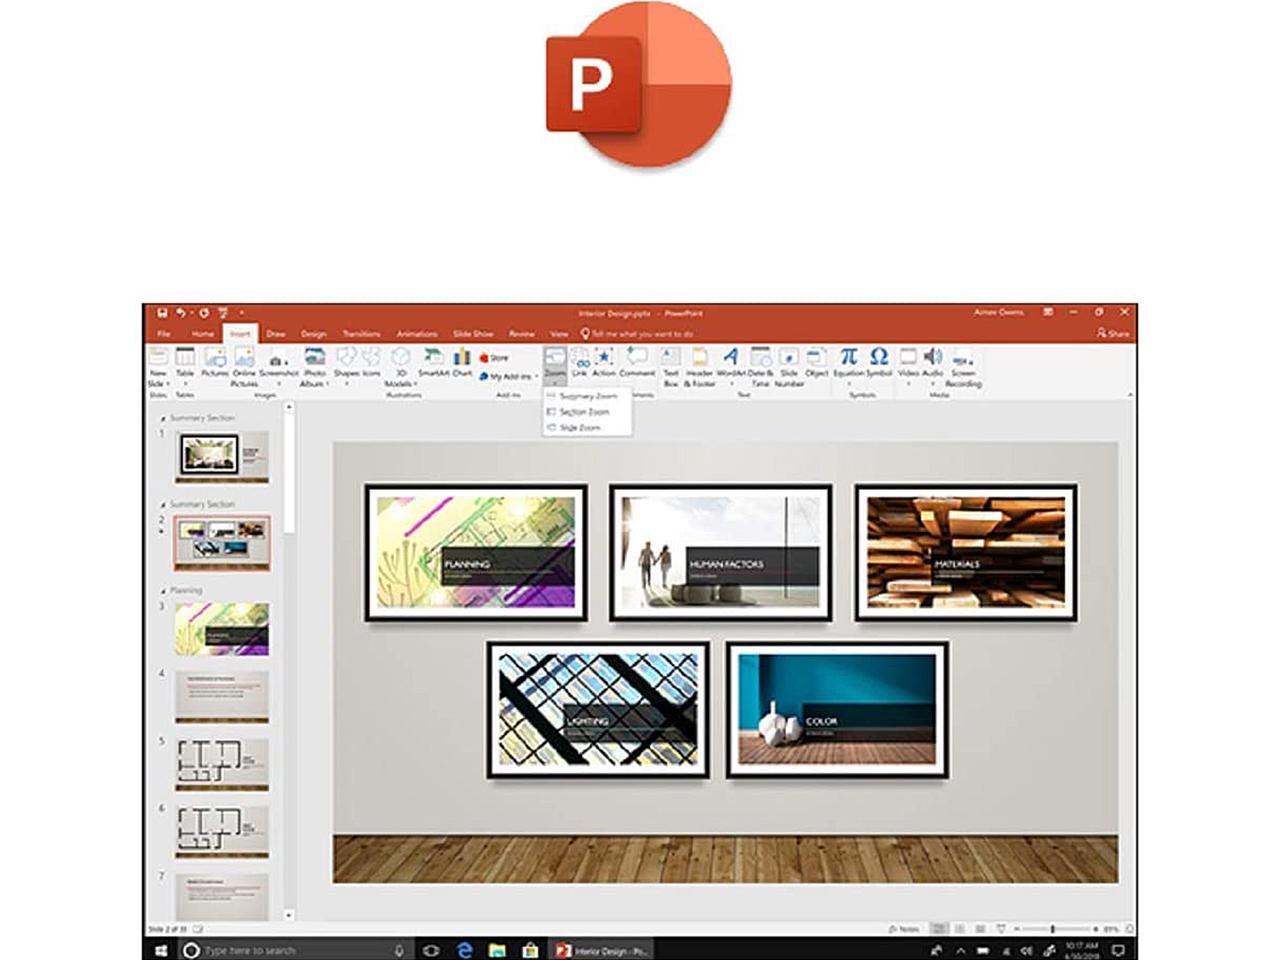 download microsoft office home and business 2019 mac